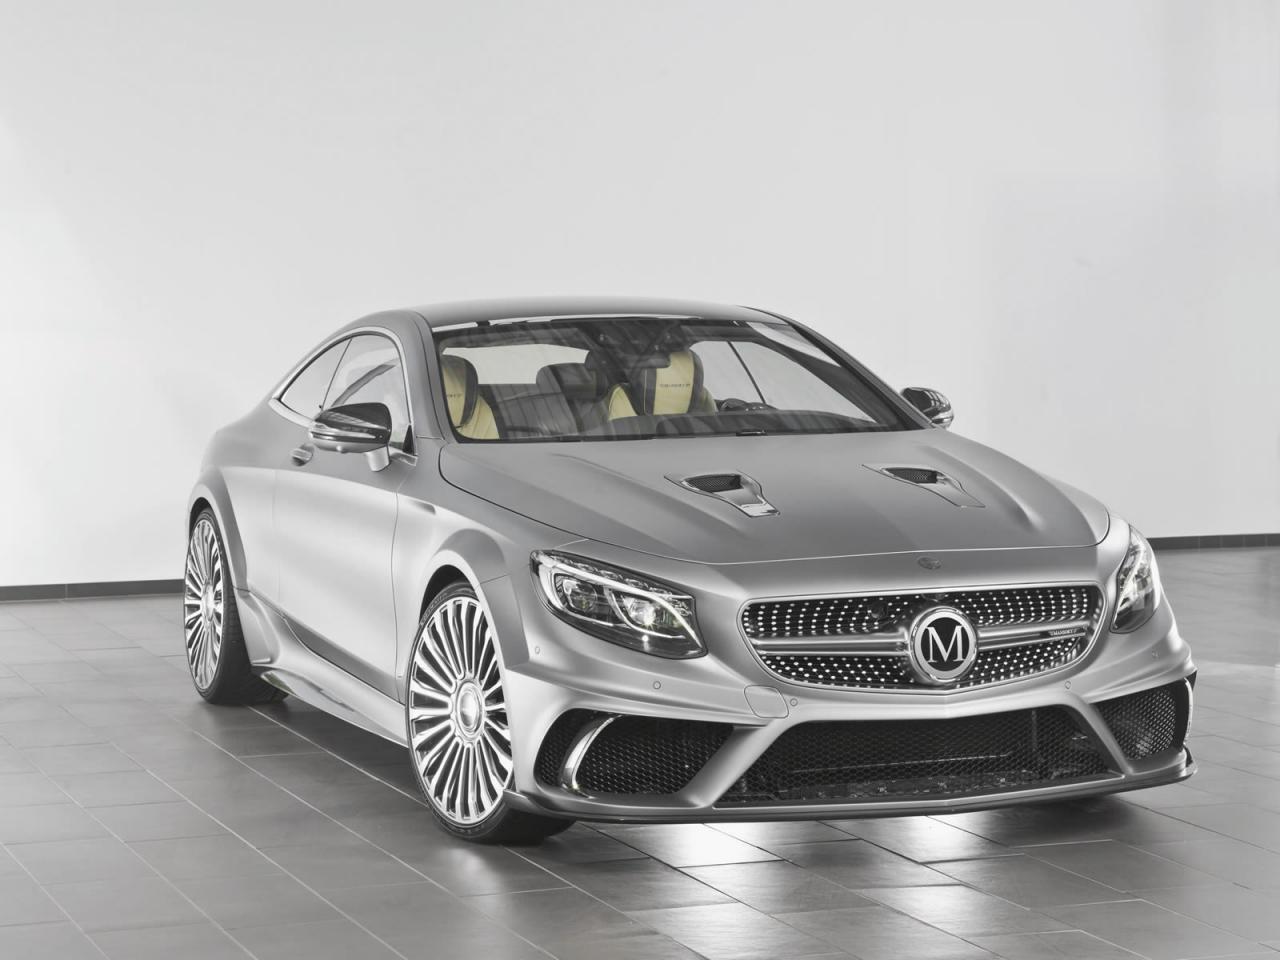 this-mercedes-benz-s63-amg-with-900-hp-from-mansory-is-the-mike-tyson-of-autos-photo-gallery_5